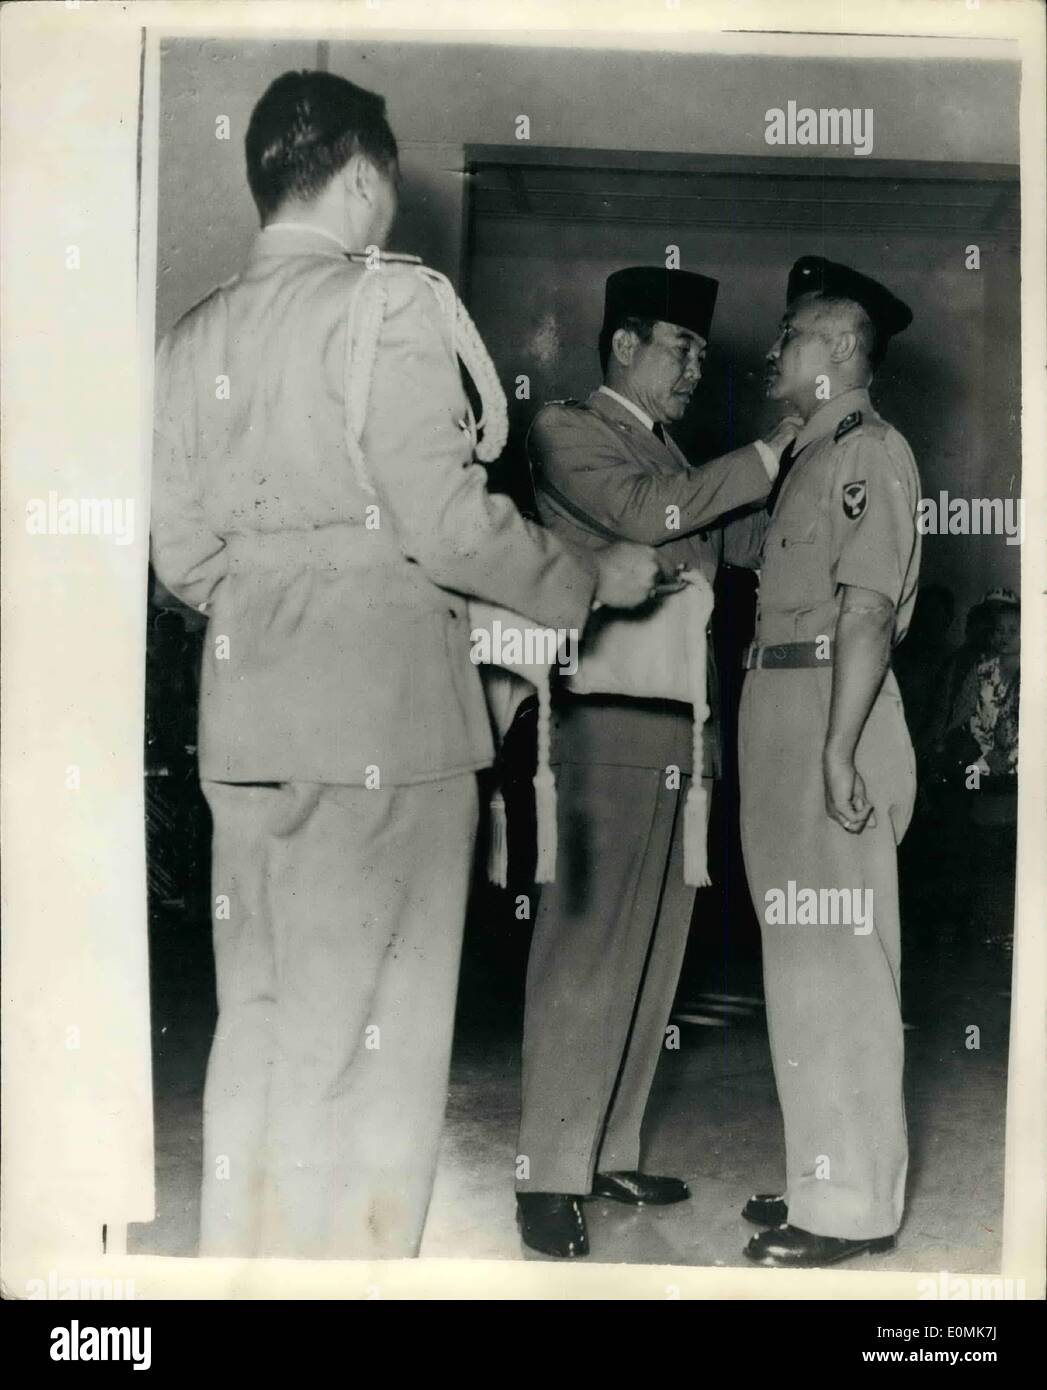 Jul. 07, 1955 - Indonesia's New Chief of Staff installed ceremony boycotted by General Staff.: President Sukarno of Indonesia recently performed the ceremony of installing Col. Bambang Utoyo as the new Chief of Staff of the Indonesian Land Forces and promoted him to the rank of Major General in a ceremony at teh Presidential Palace of Djakarta. The ceremony was a short one because all the General Staff of the Land Forces as well as the Army Commanders of seven military territories boycotted Col Stock Photo